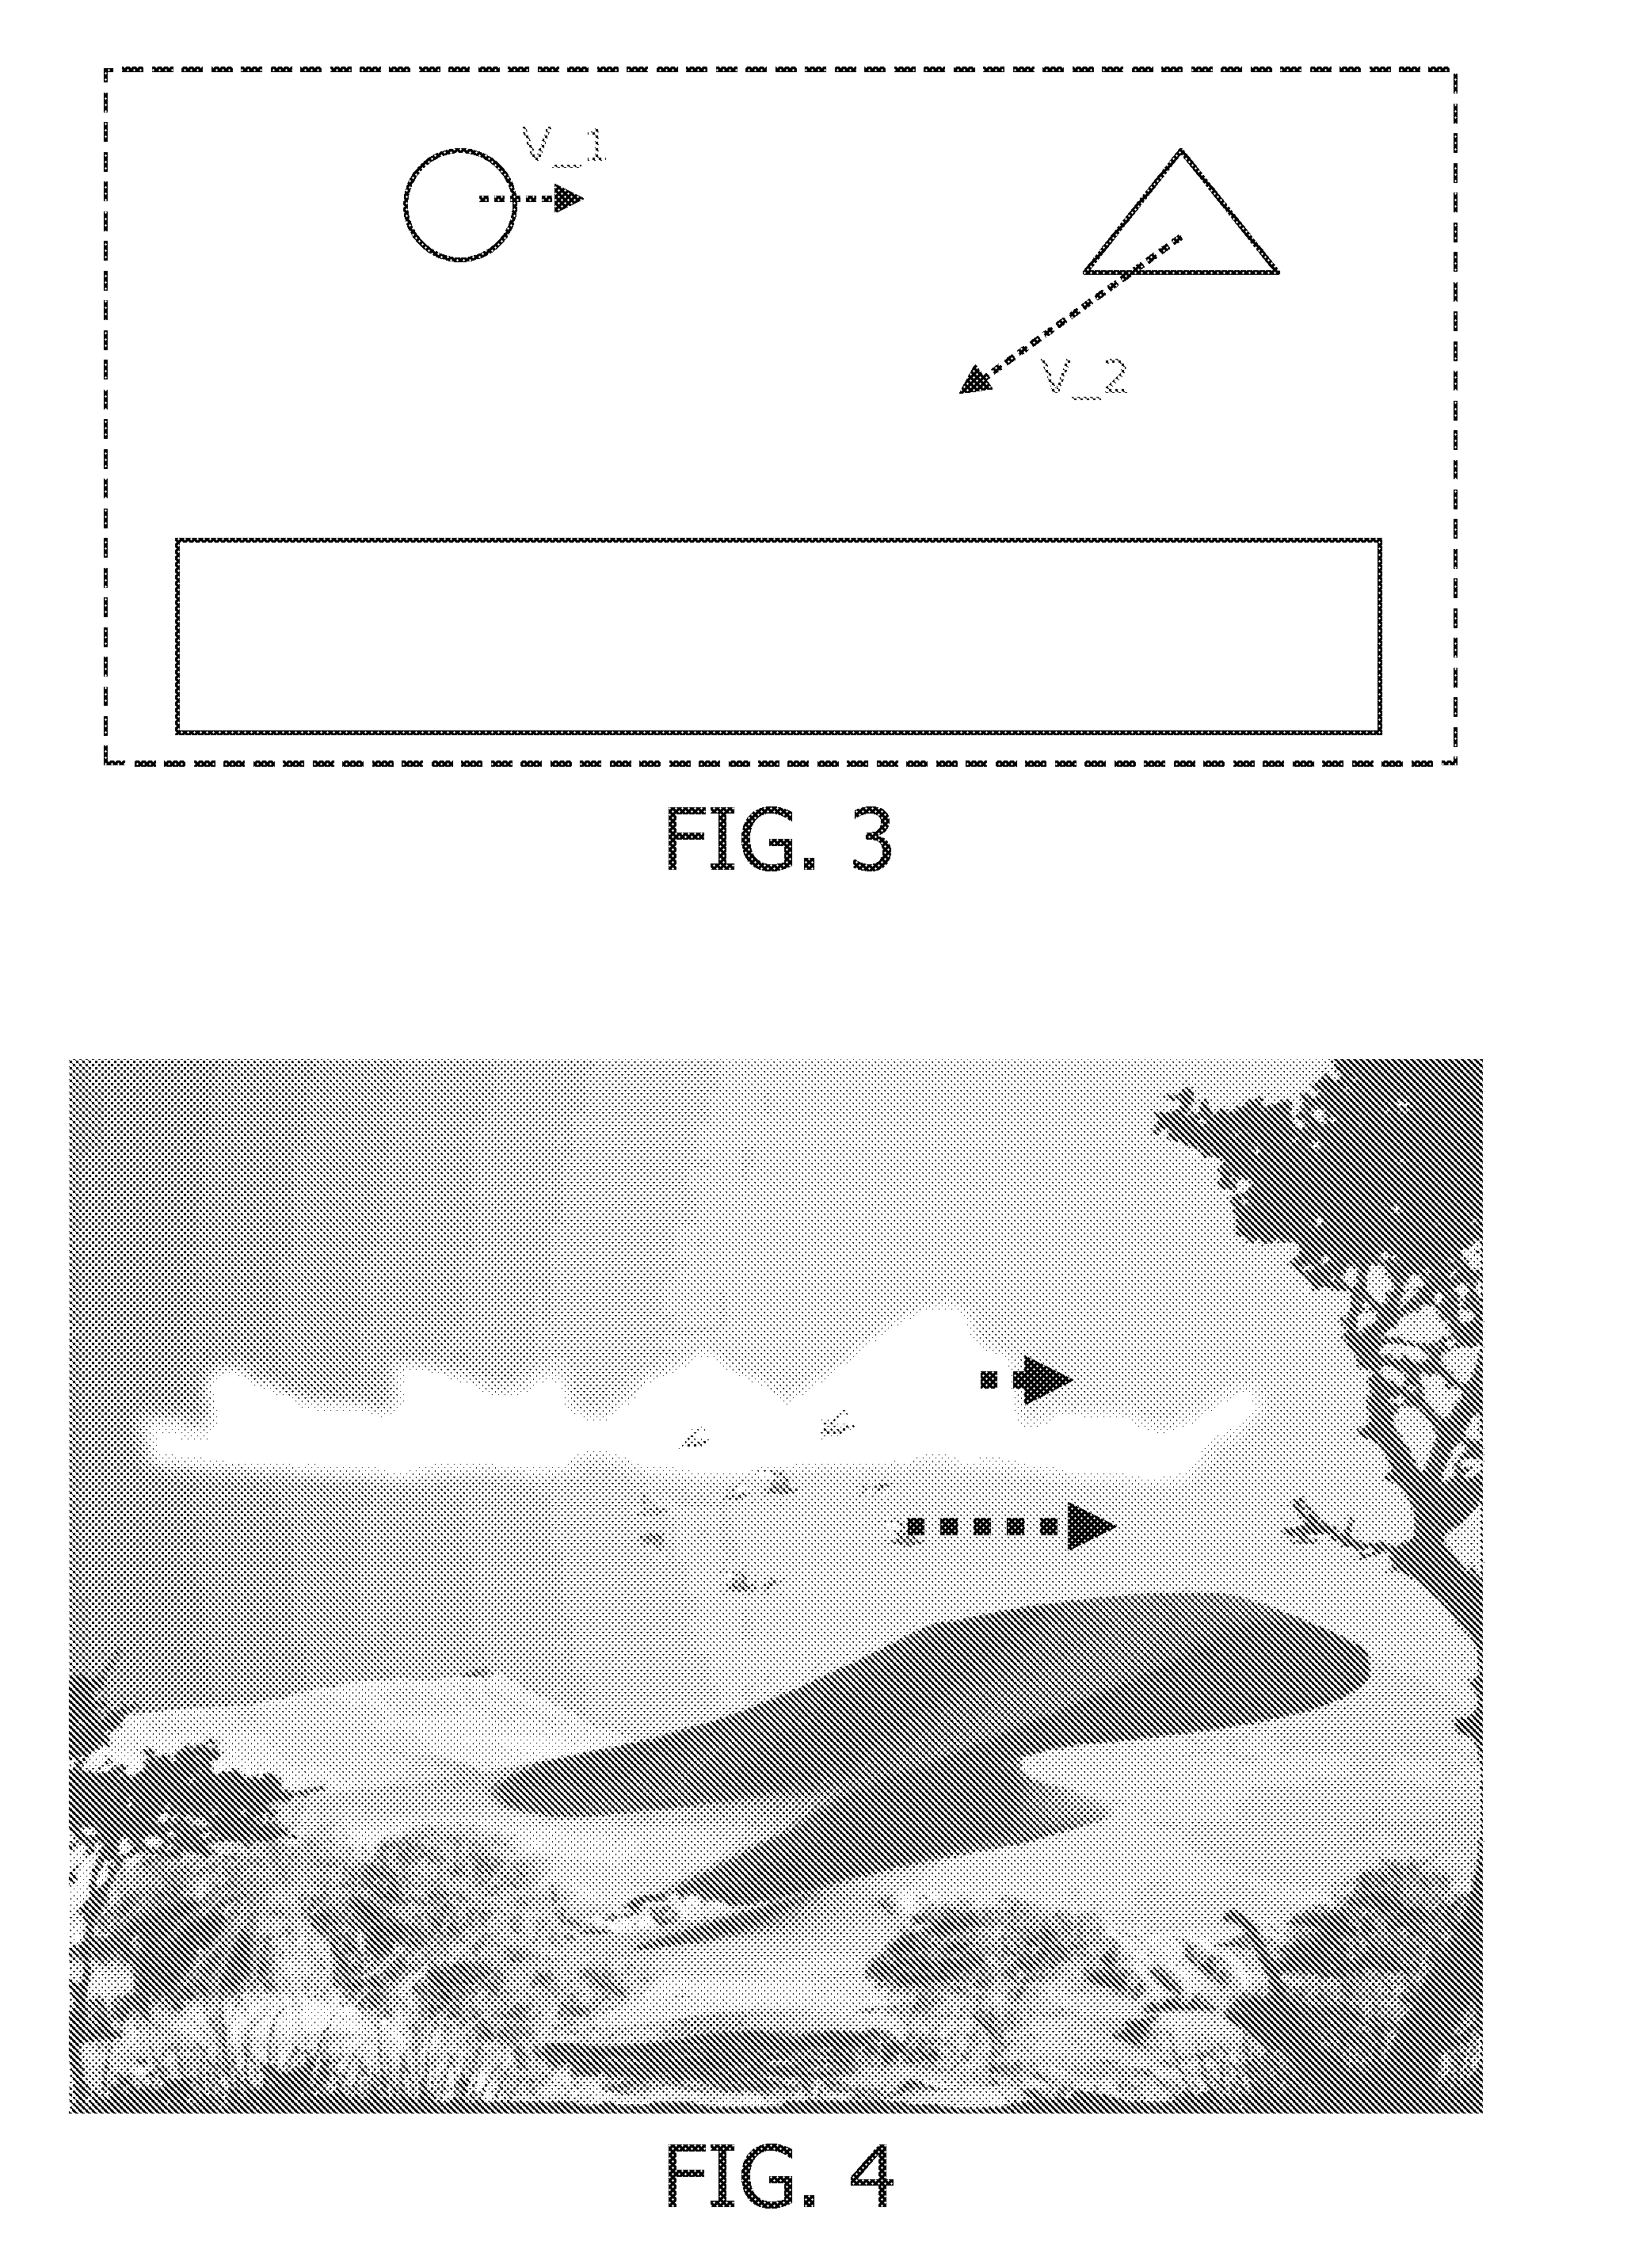 System and method for distraction of patient during scanning